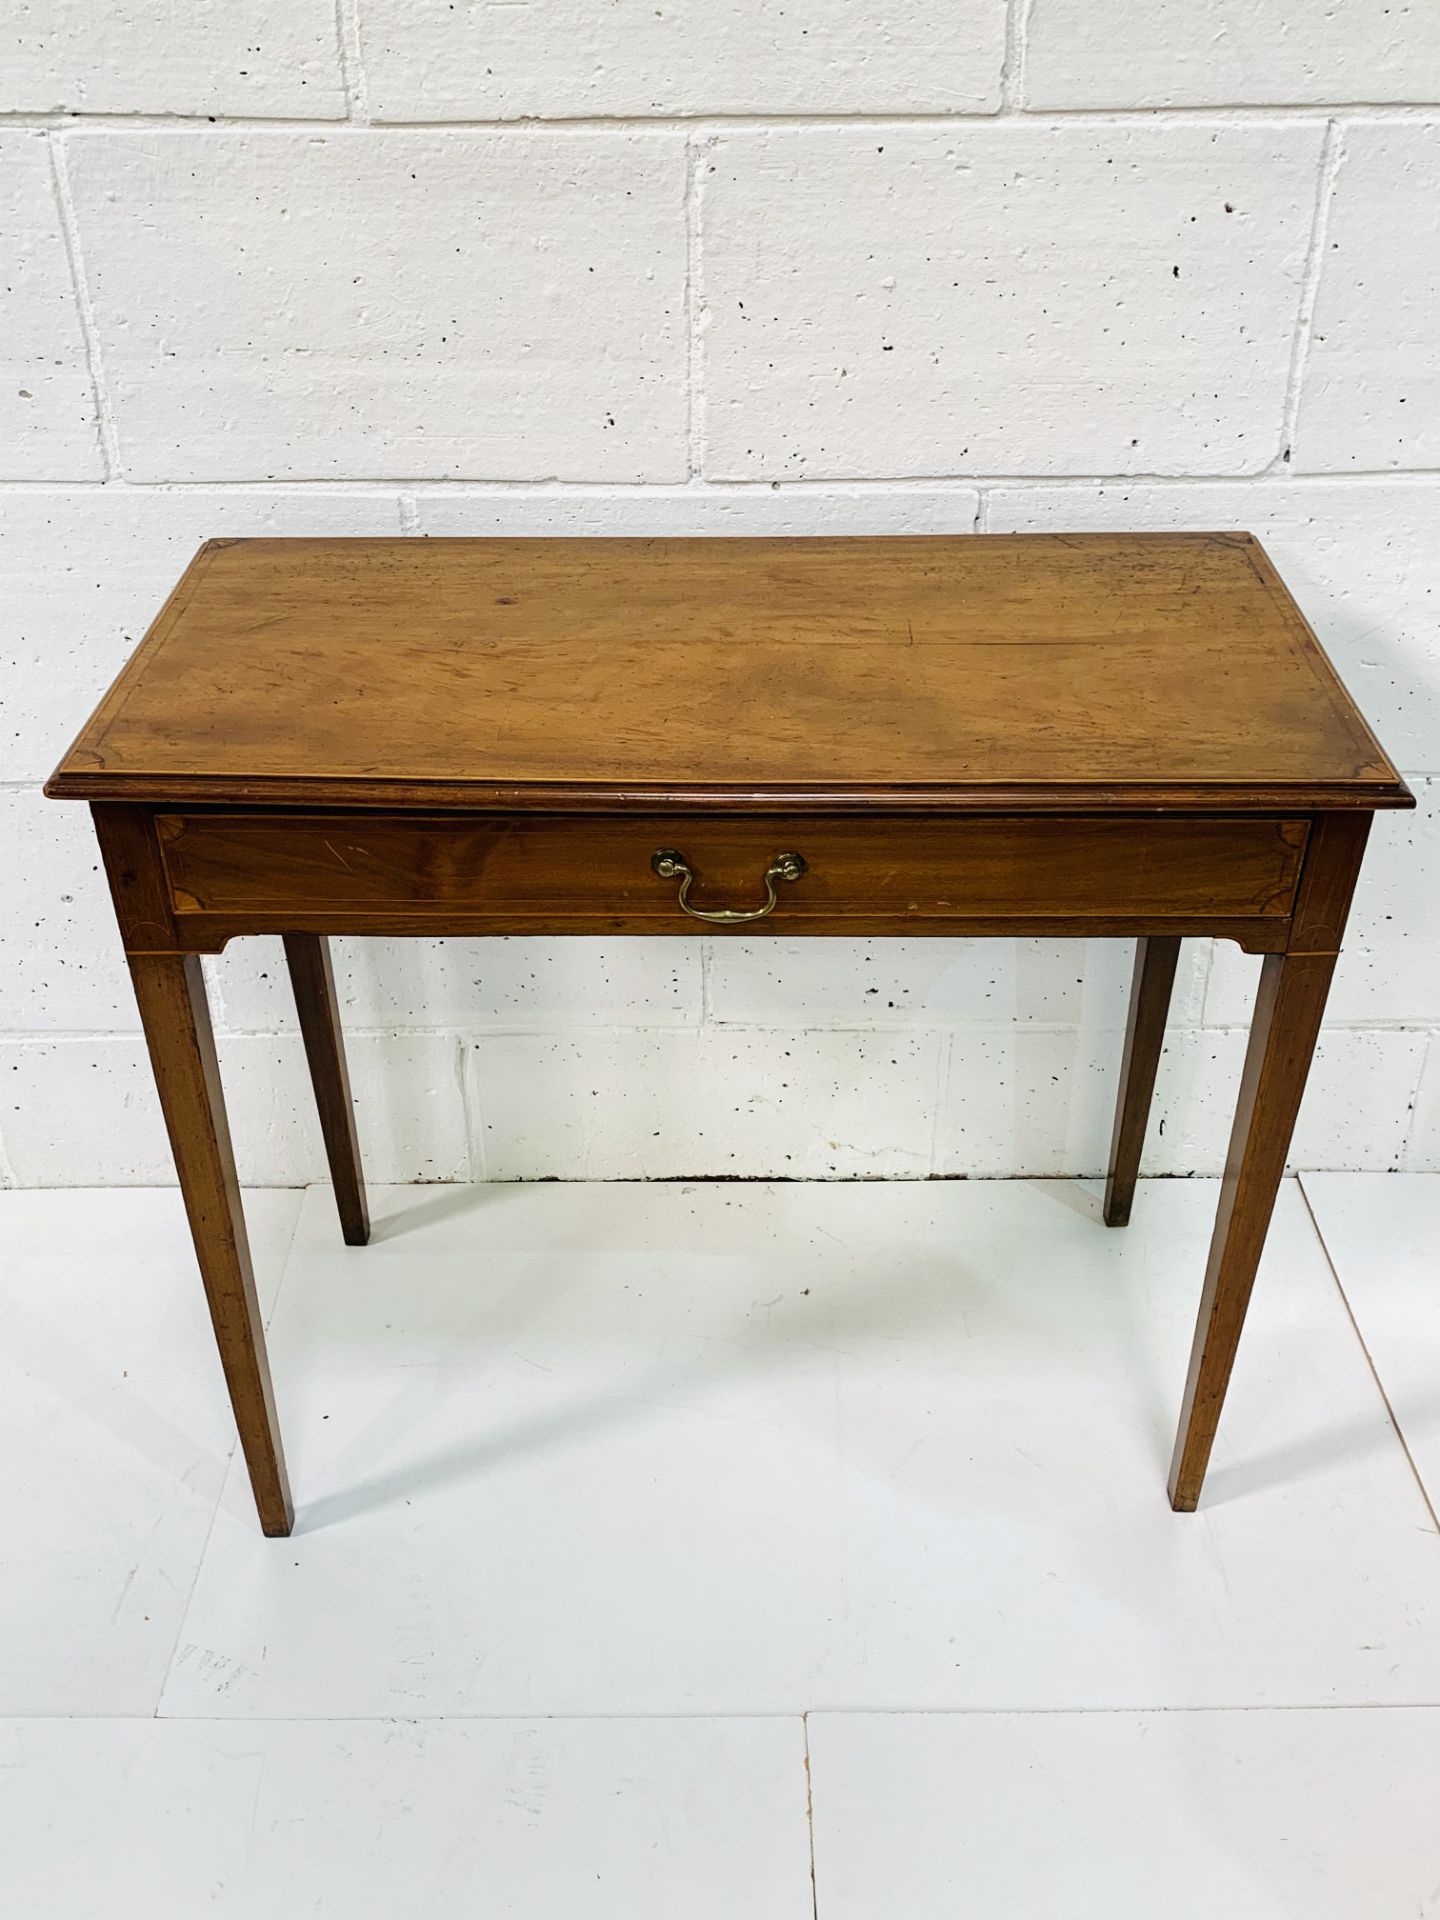 Mahogany small table with shell inlaid, frieze drawer on tapered legs.